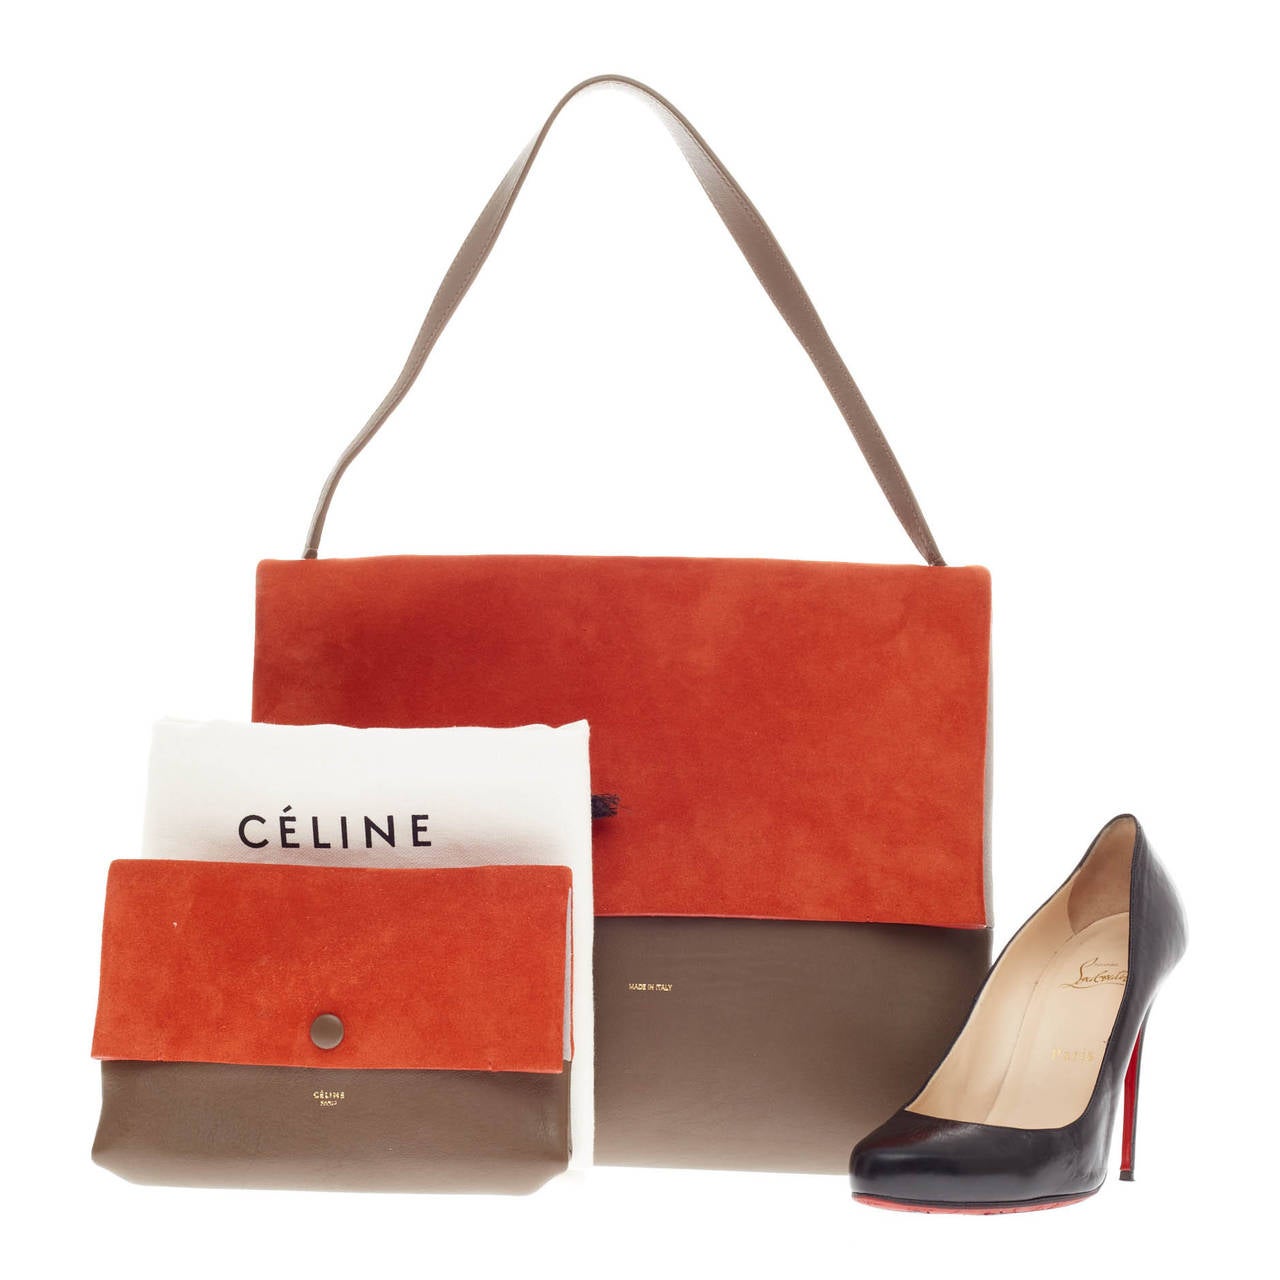 This authentic Celine All Soft Tote in Suede designed in burnt orange, heather gray and brown color block calfskin leather showcases a neutral and understated look perfect for the modern woman. Made of soft suede and smooth leather panels, this